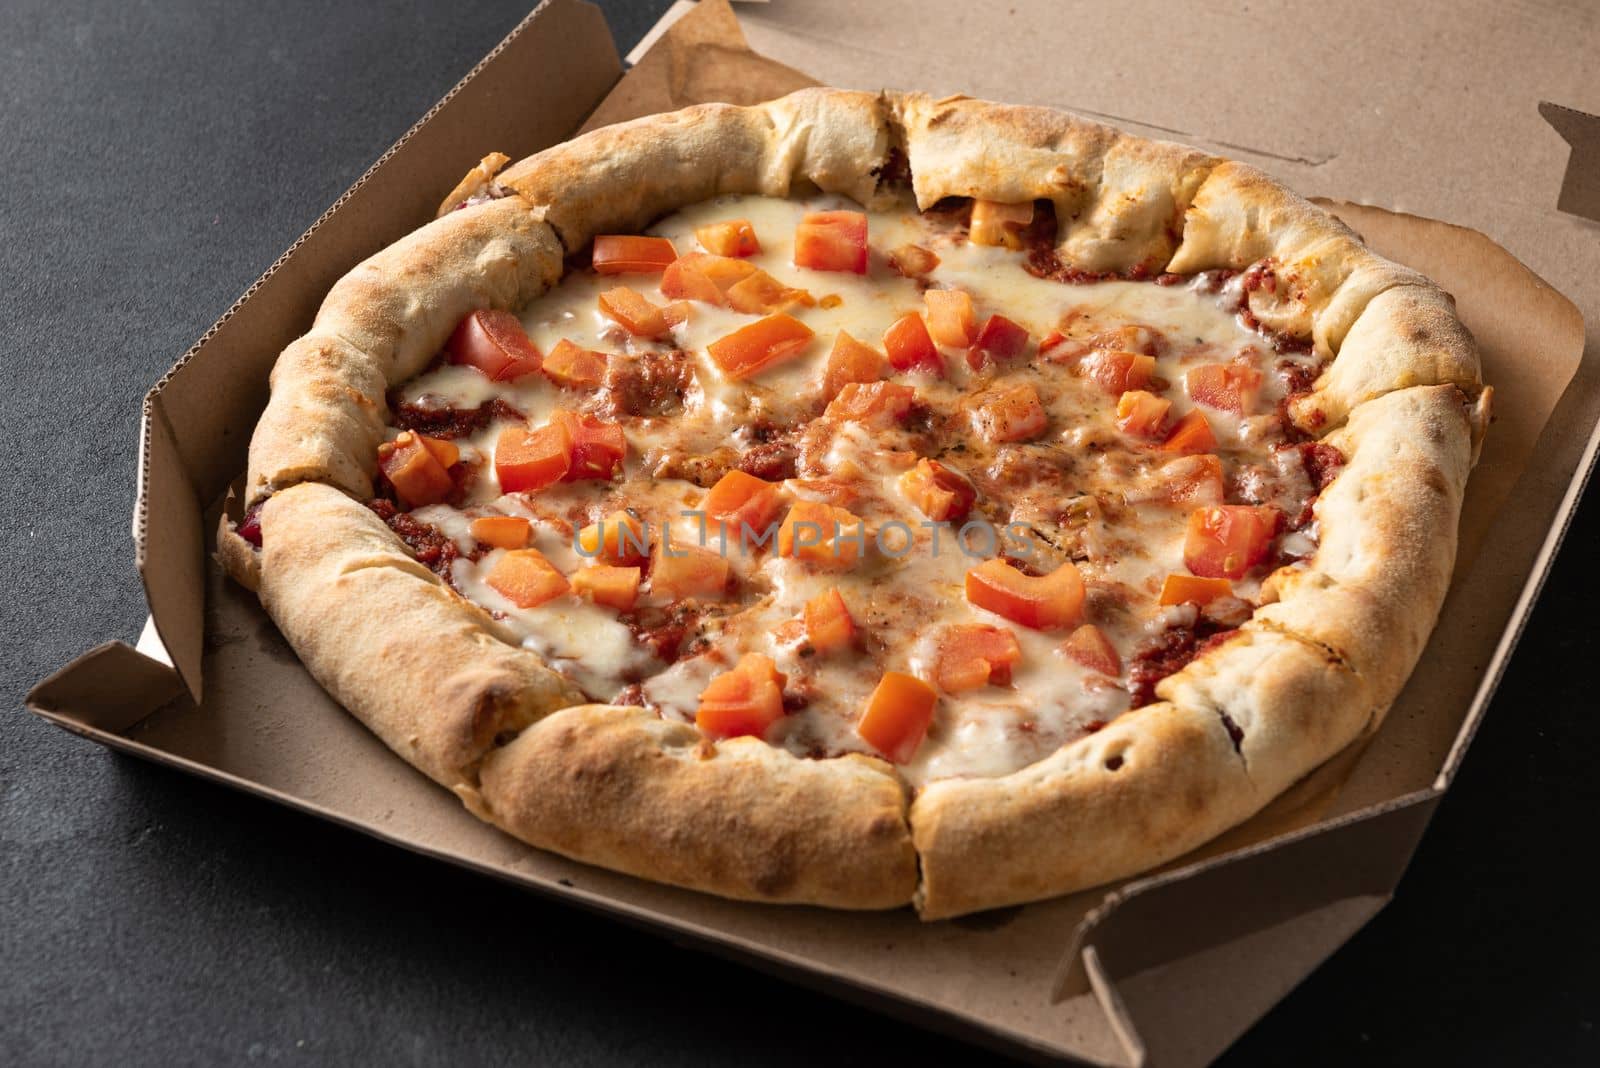 Pizza with tomatoes and mozzarella lies in a brown paper box. Pizza delivery.